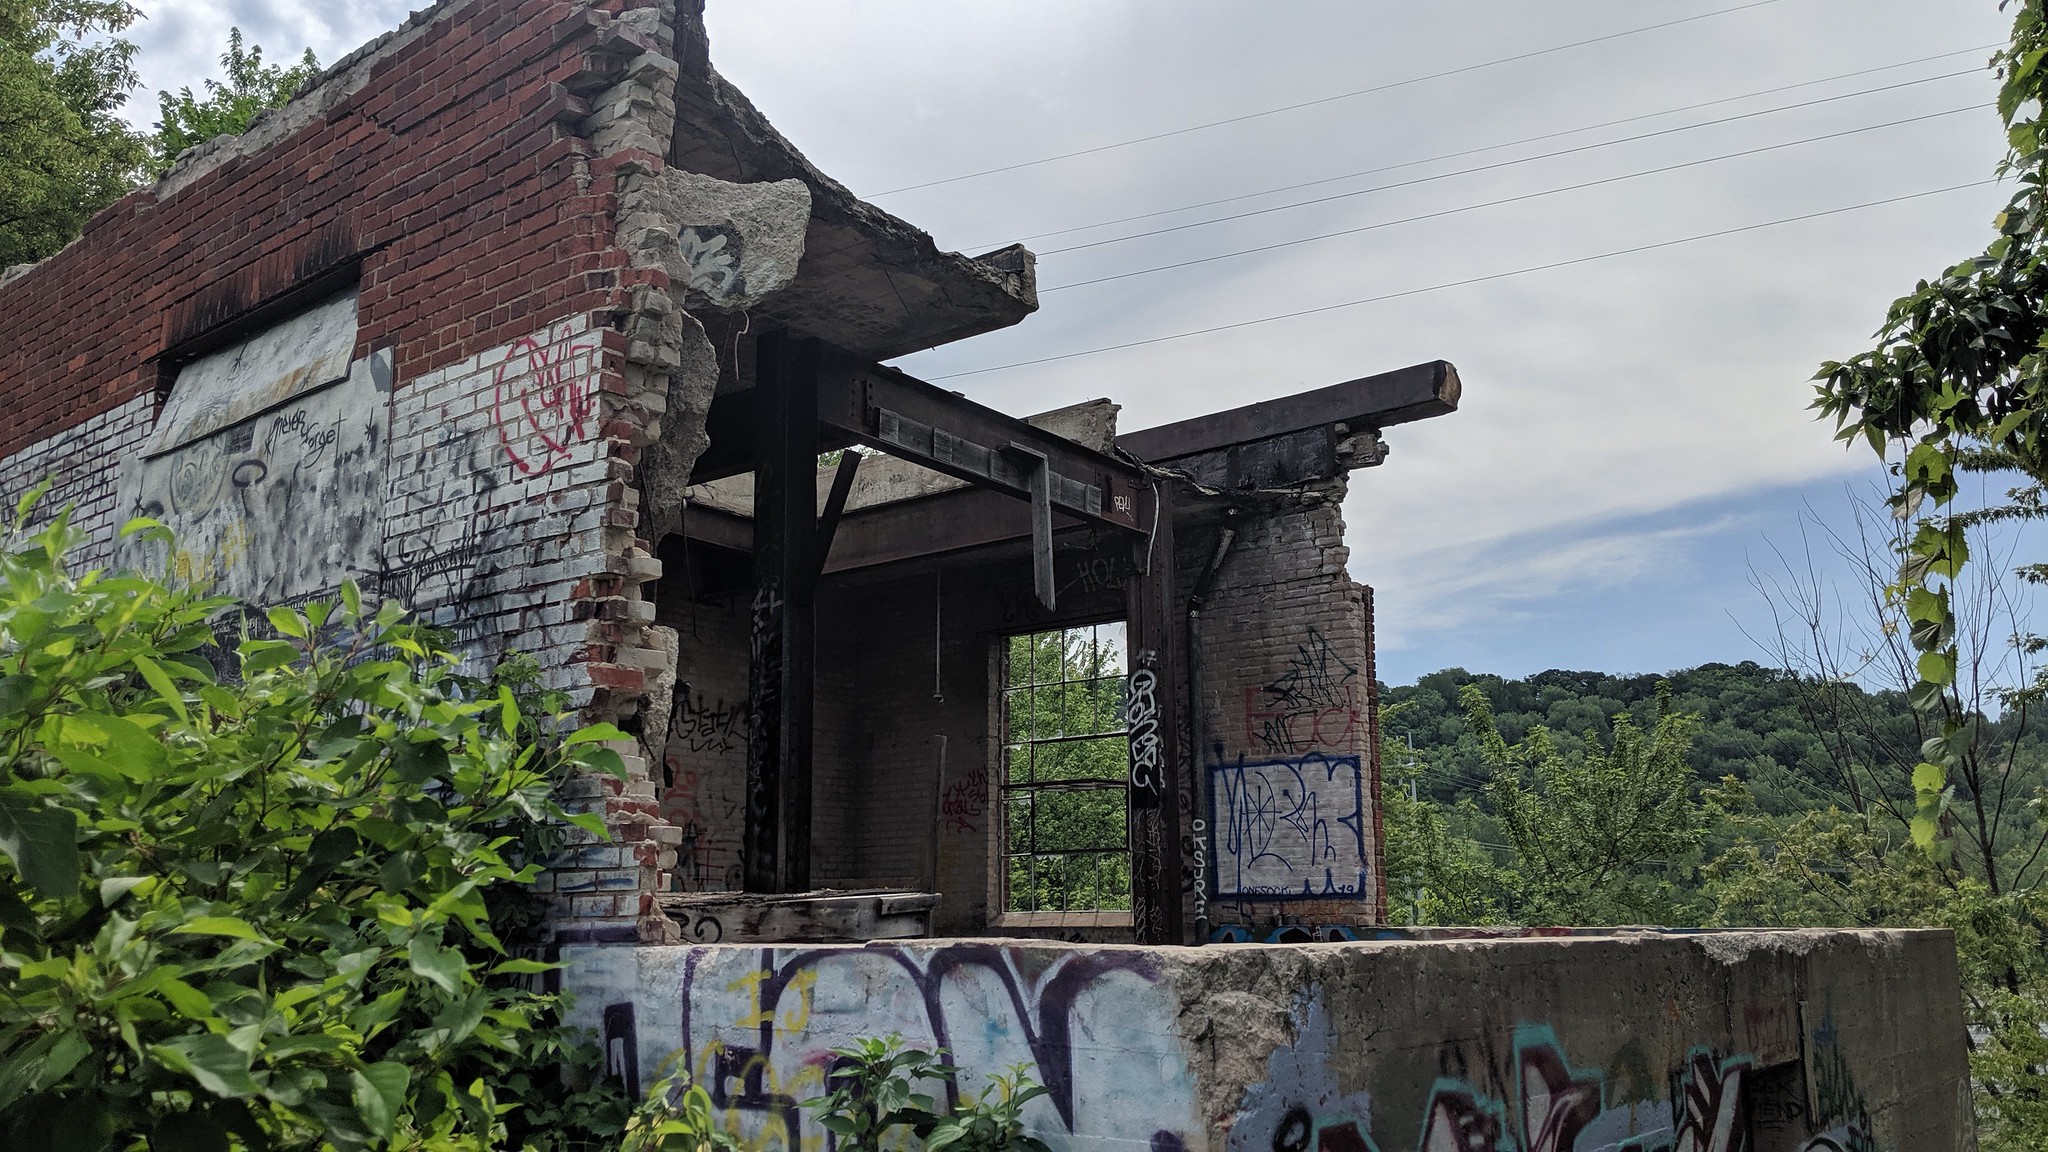 A small brick and concrete structure in significant disrepair.